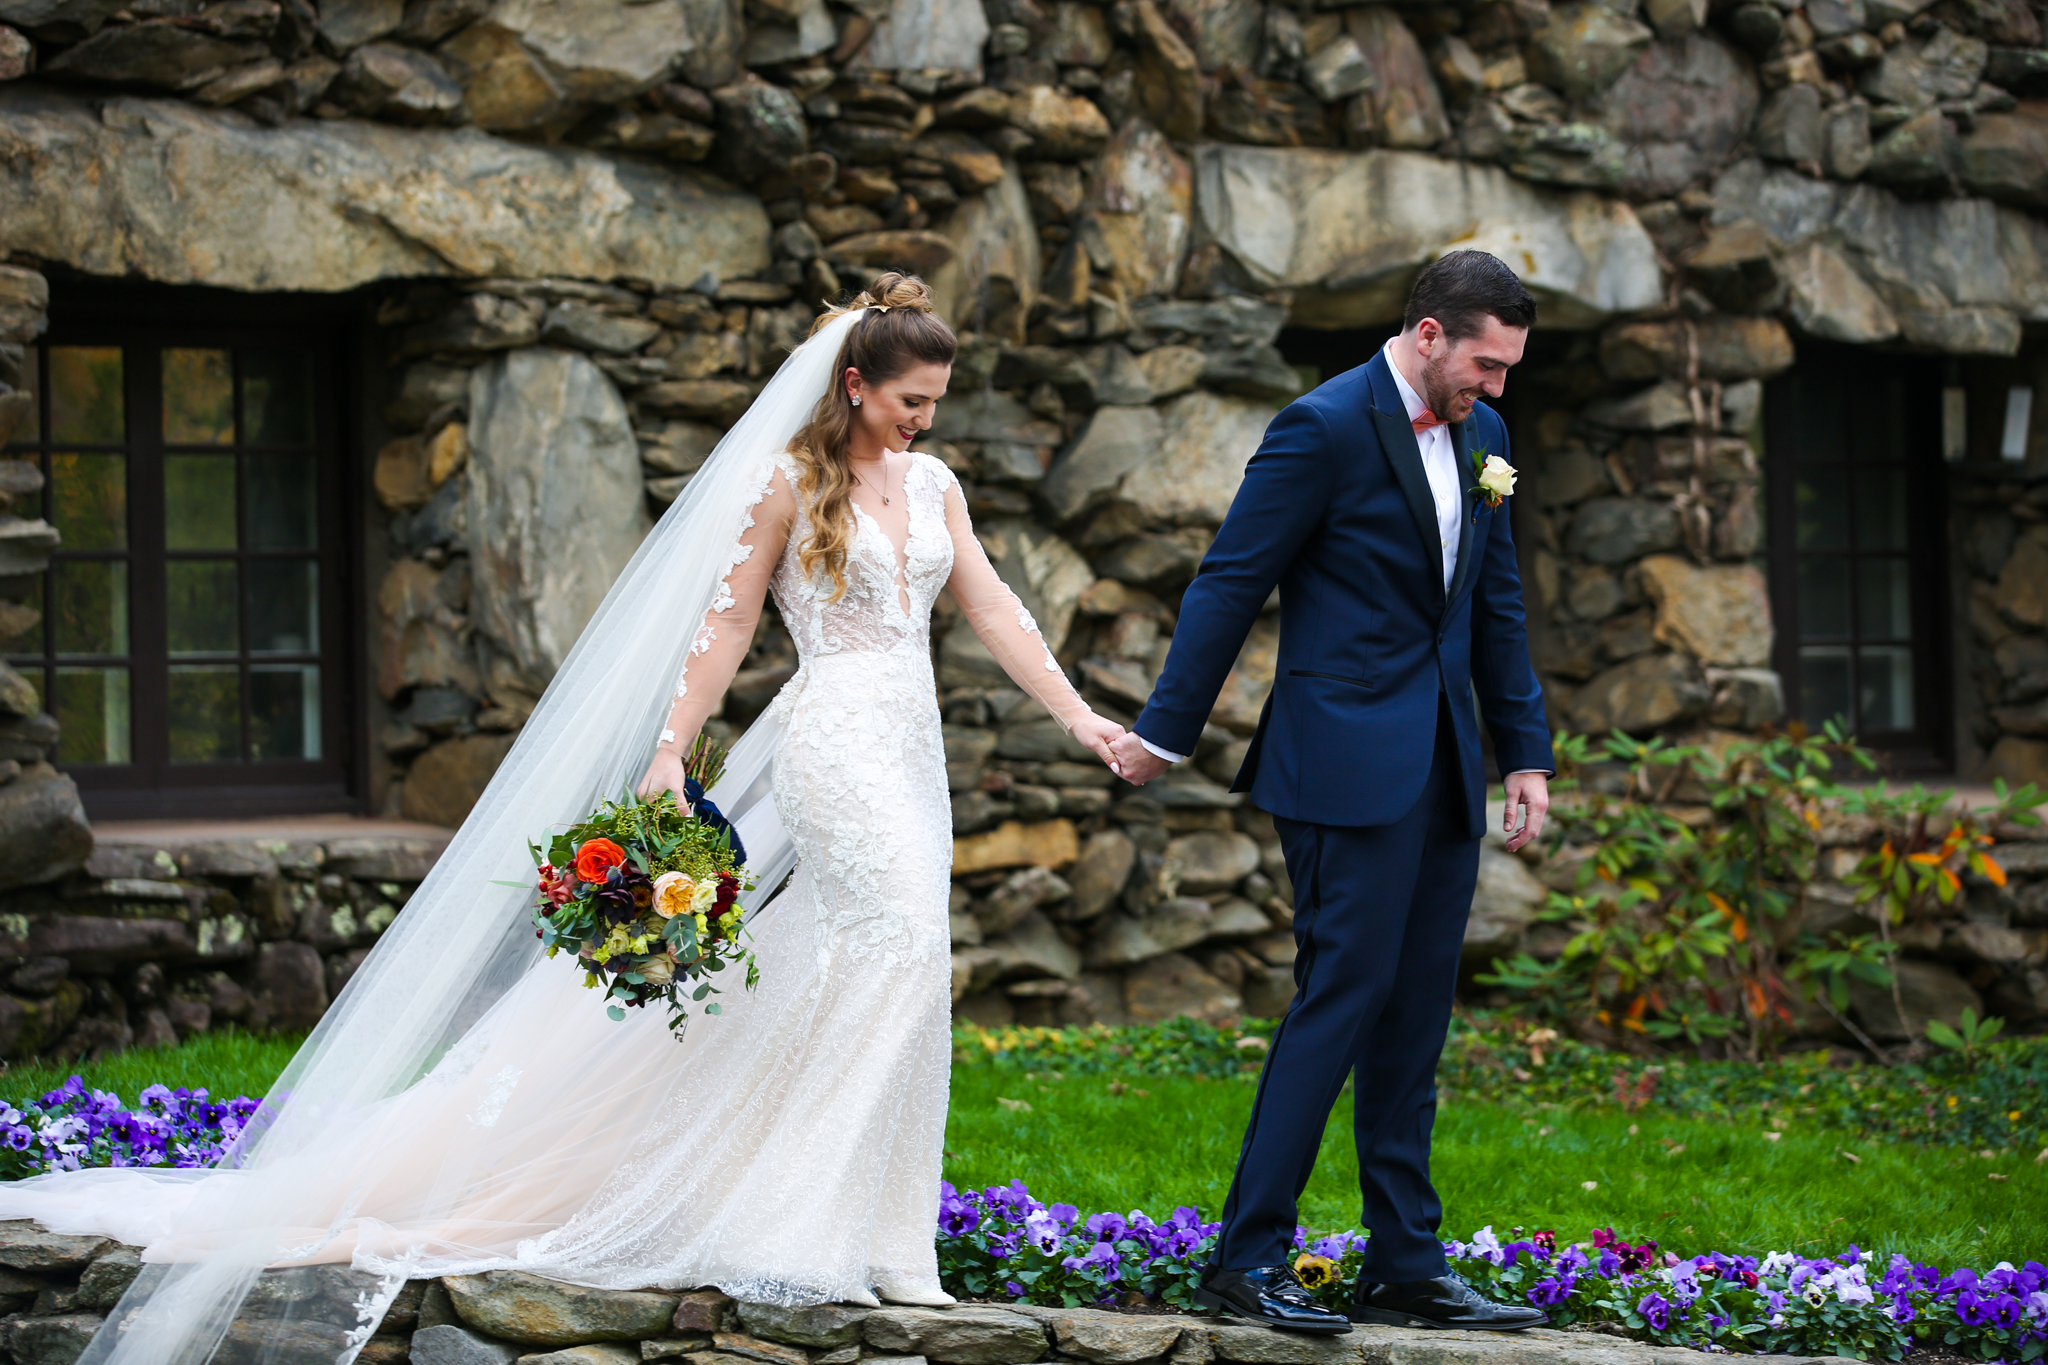 Asheville holds many events at the Grove Park Inn. Weddings, private parties, and special events are just some of the events Light Shifter Studios photographs. 